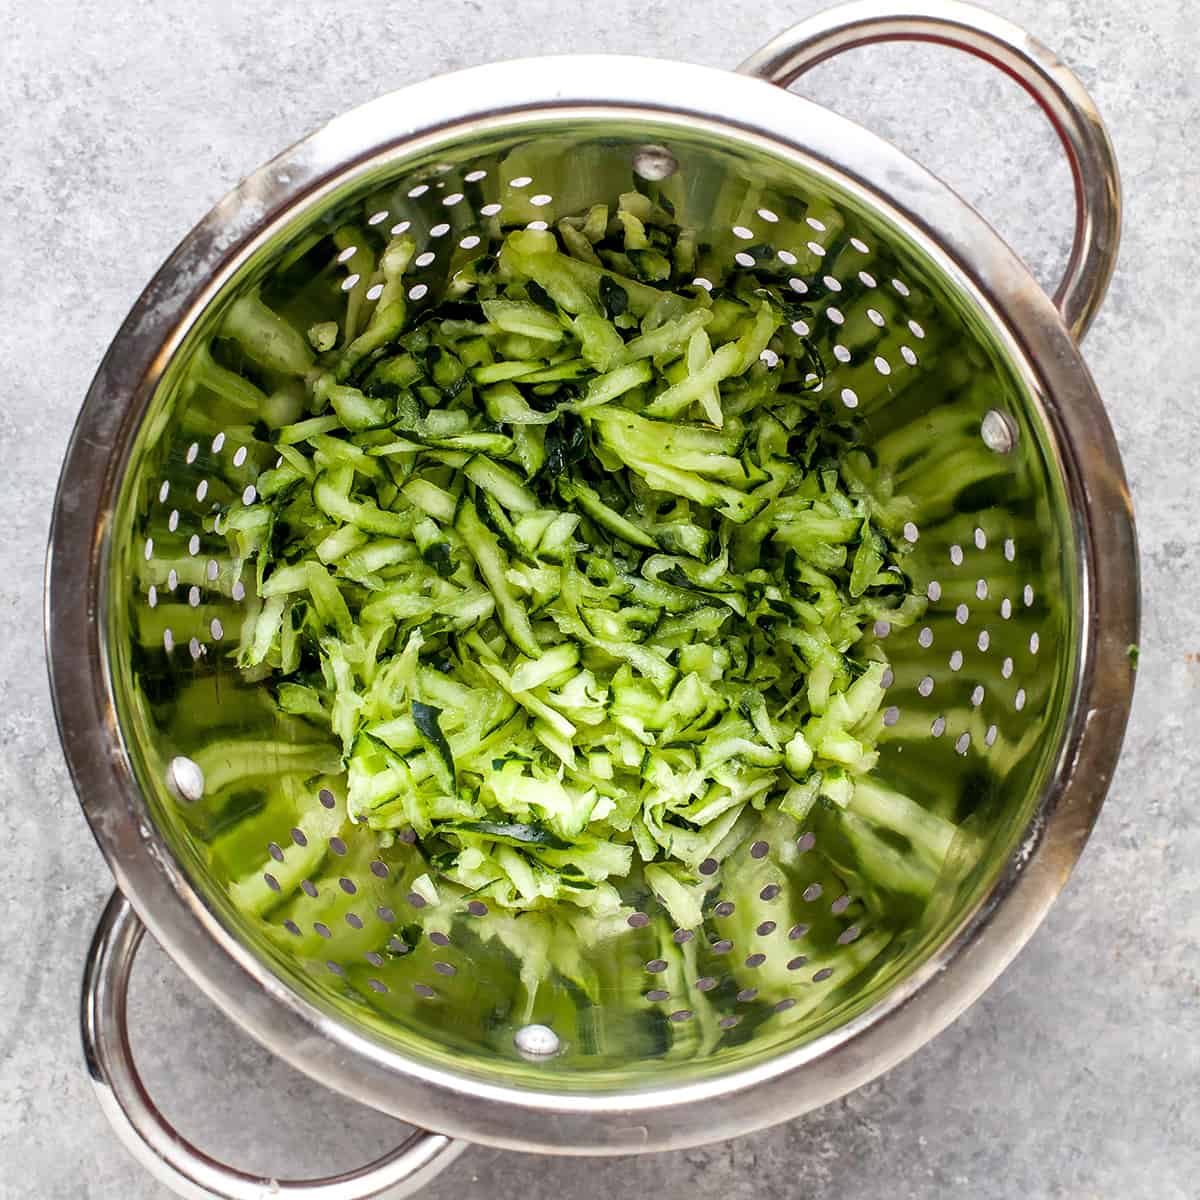 How to Make Tzatziki Sauce - shredded cucumber in a colander to remove water